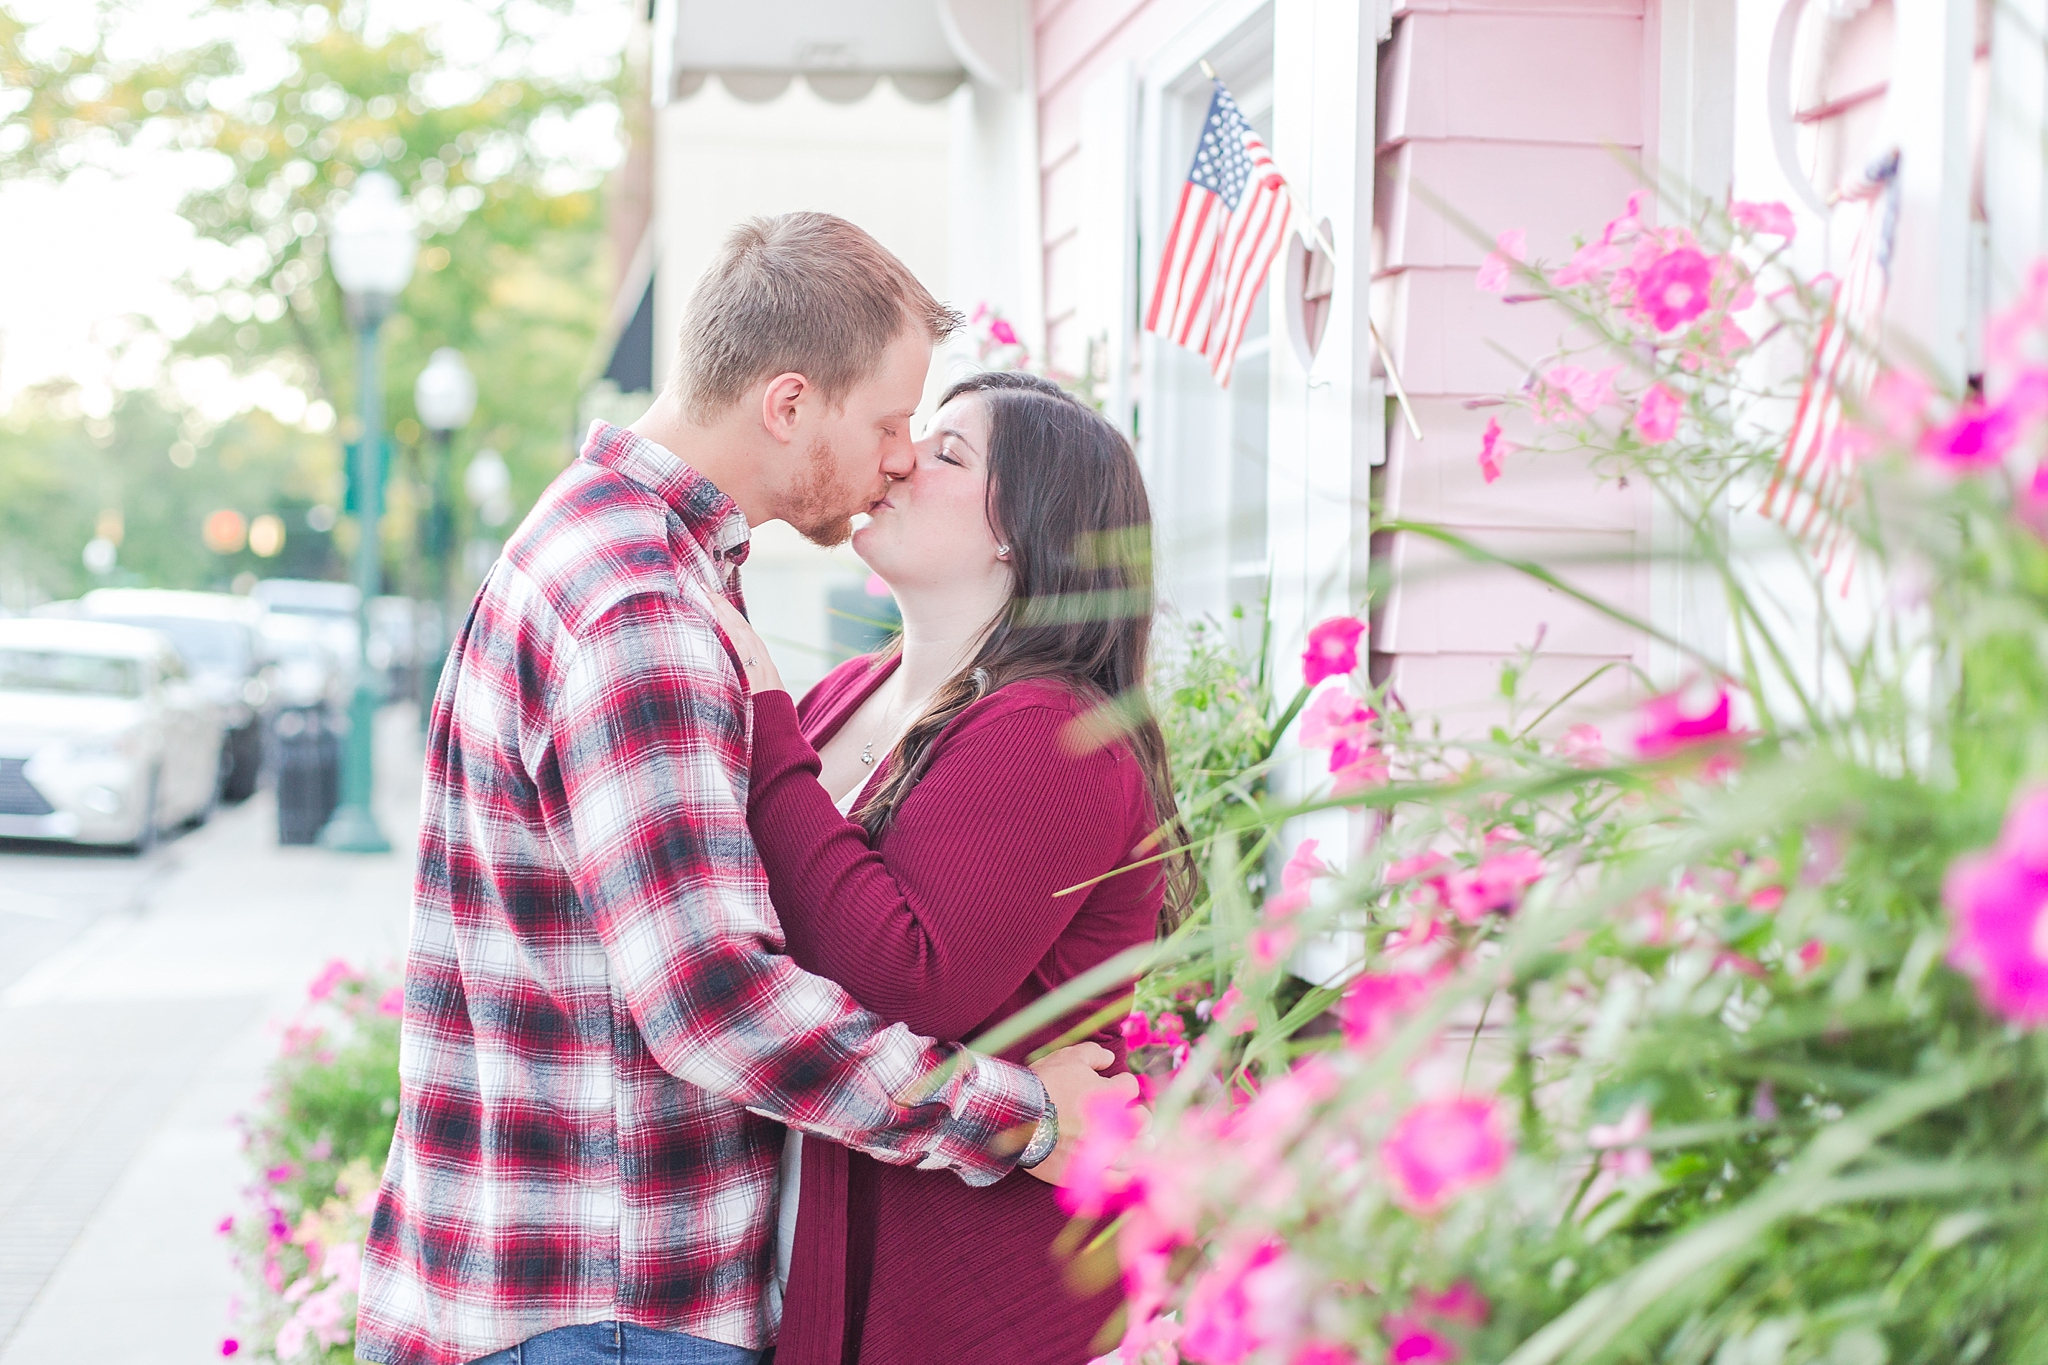 fun-fall-engagement-photos-in-downtown-plymouth-michigan-by-courtney-carolyn-photography_0015.jpg